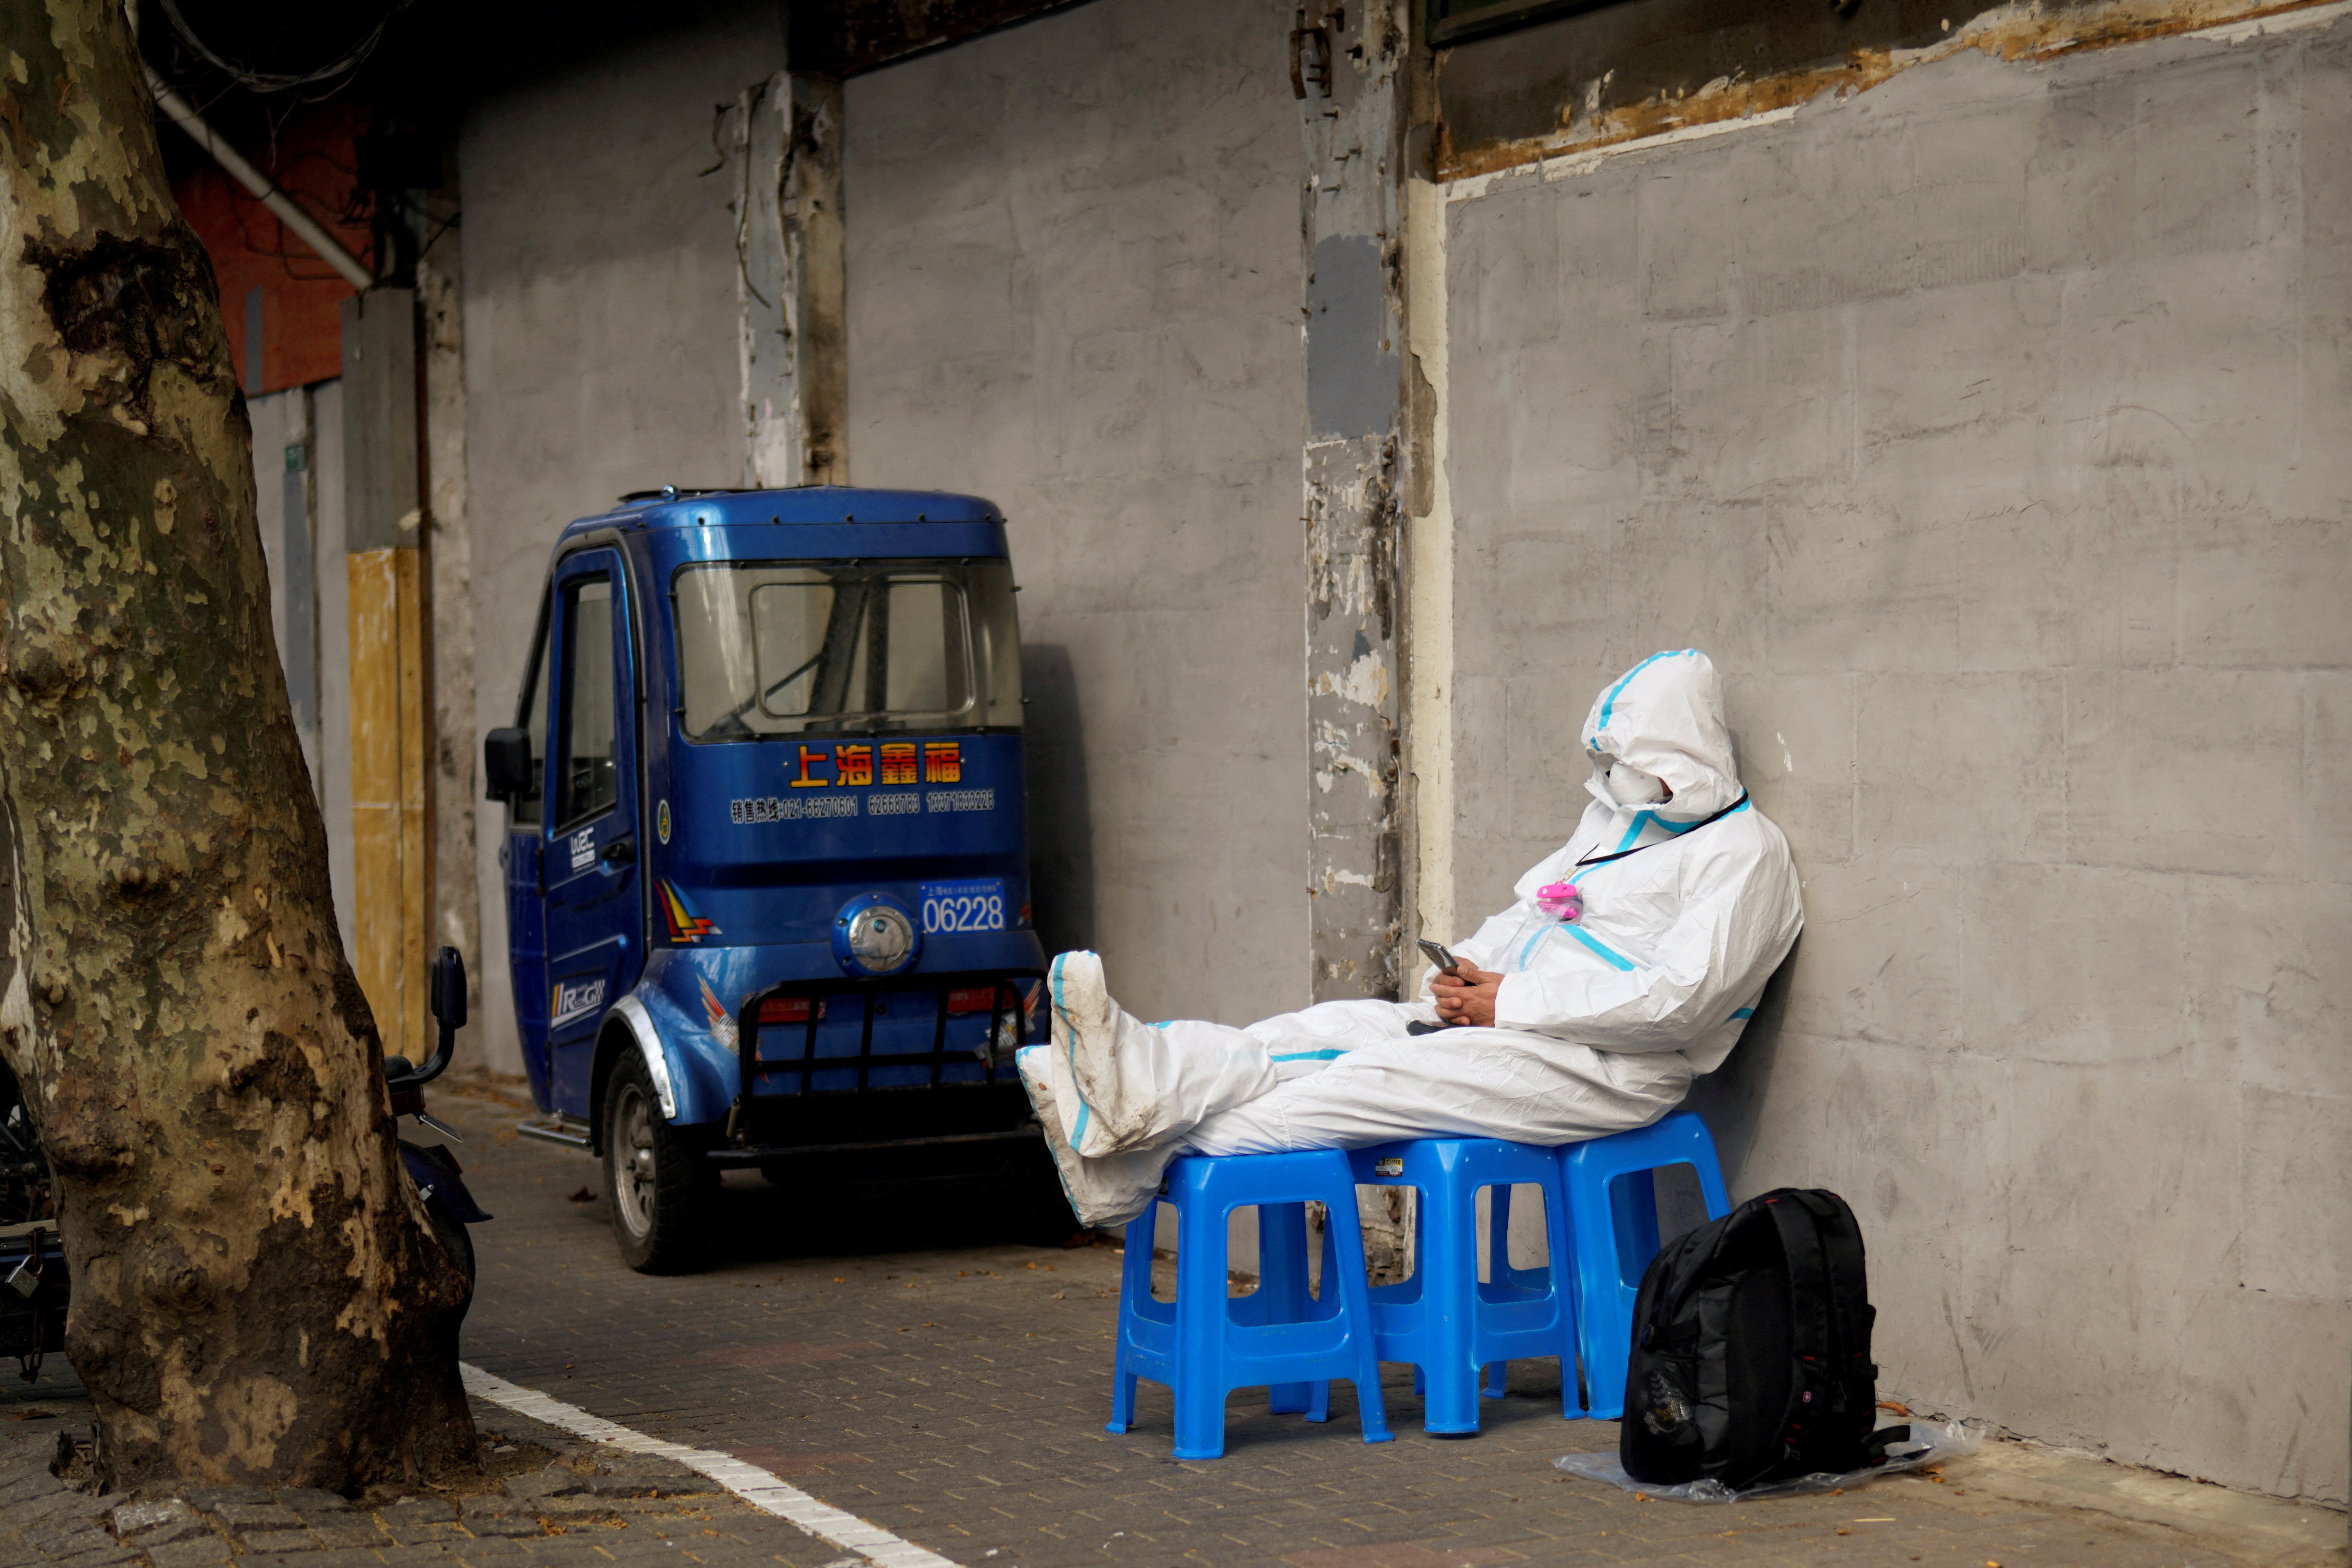 A worker in a protective suit sits on plastic stools following the coronavirus disease (COVID-19) outbreak in Shanghai, China March 30, 2022.